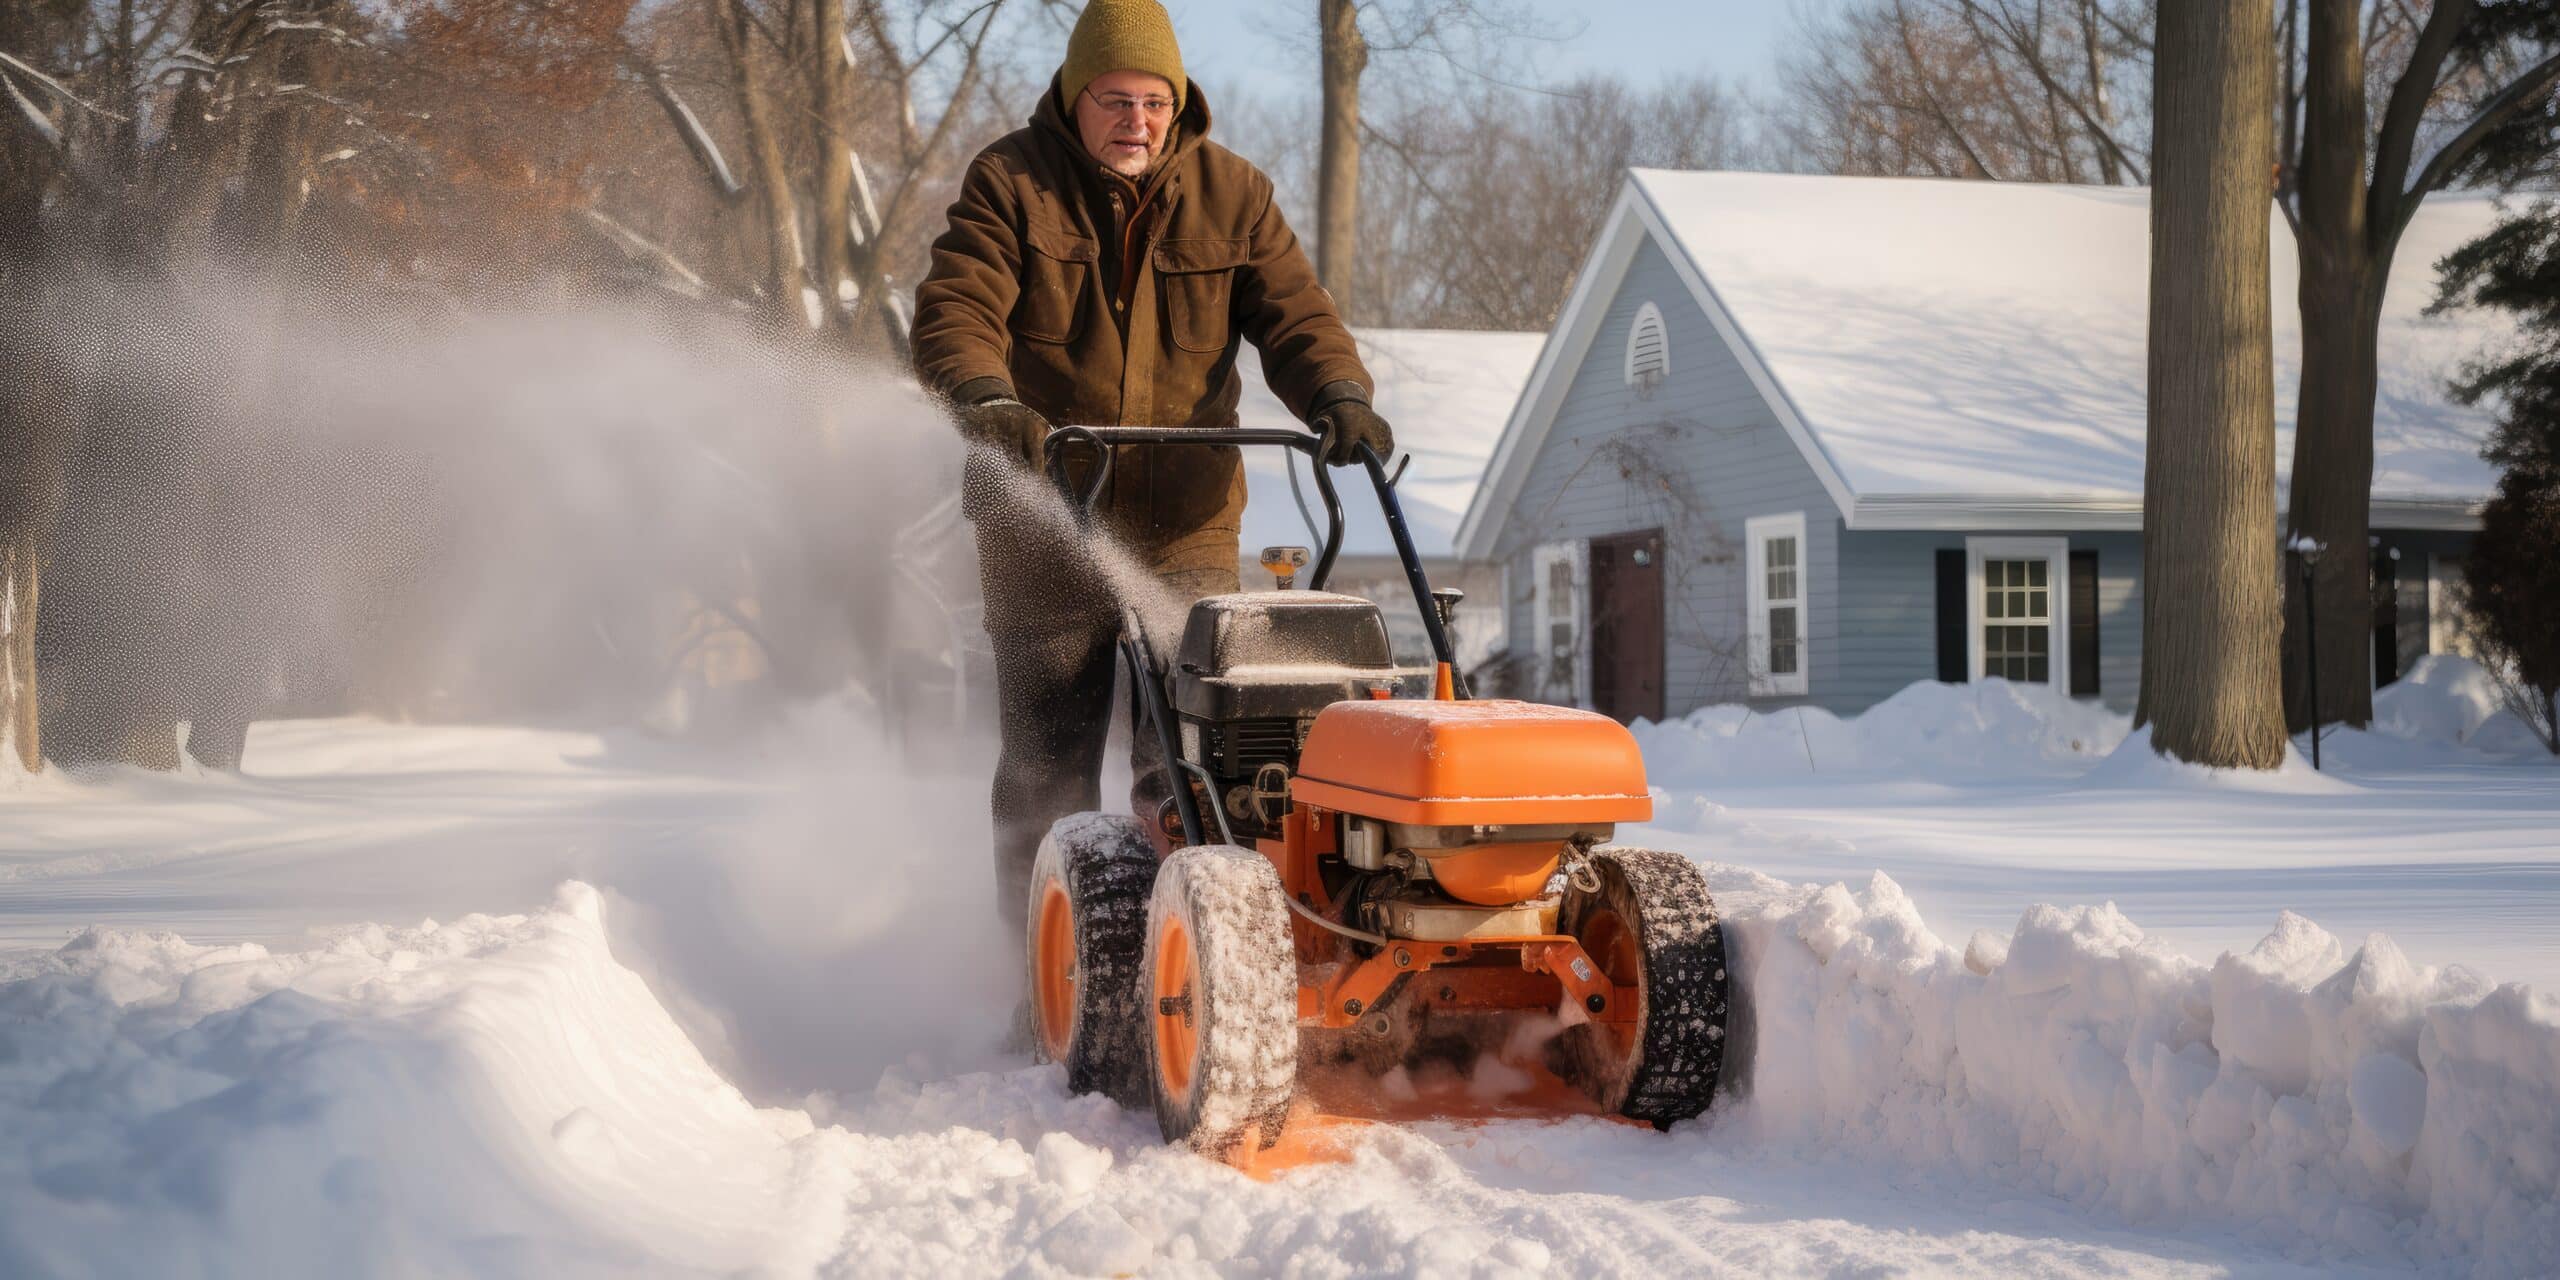 www.appr.com : Who manufactures Yard Force snow blowers?